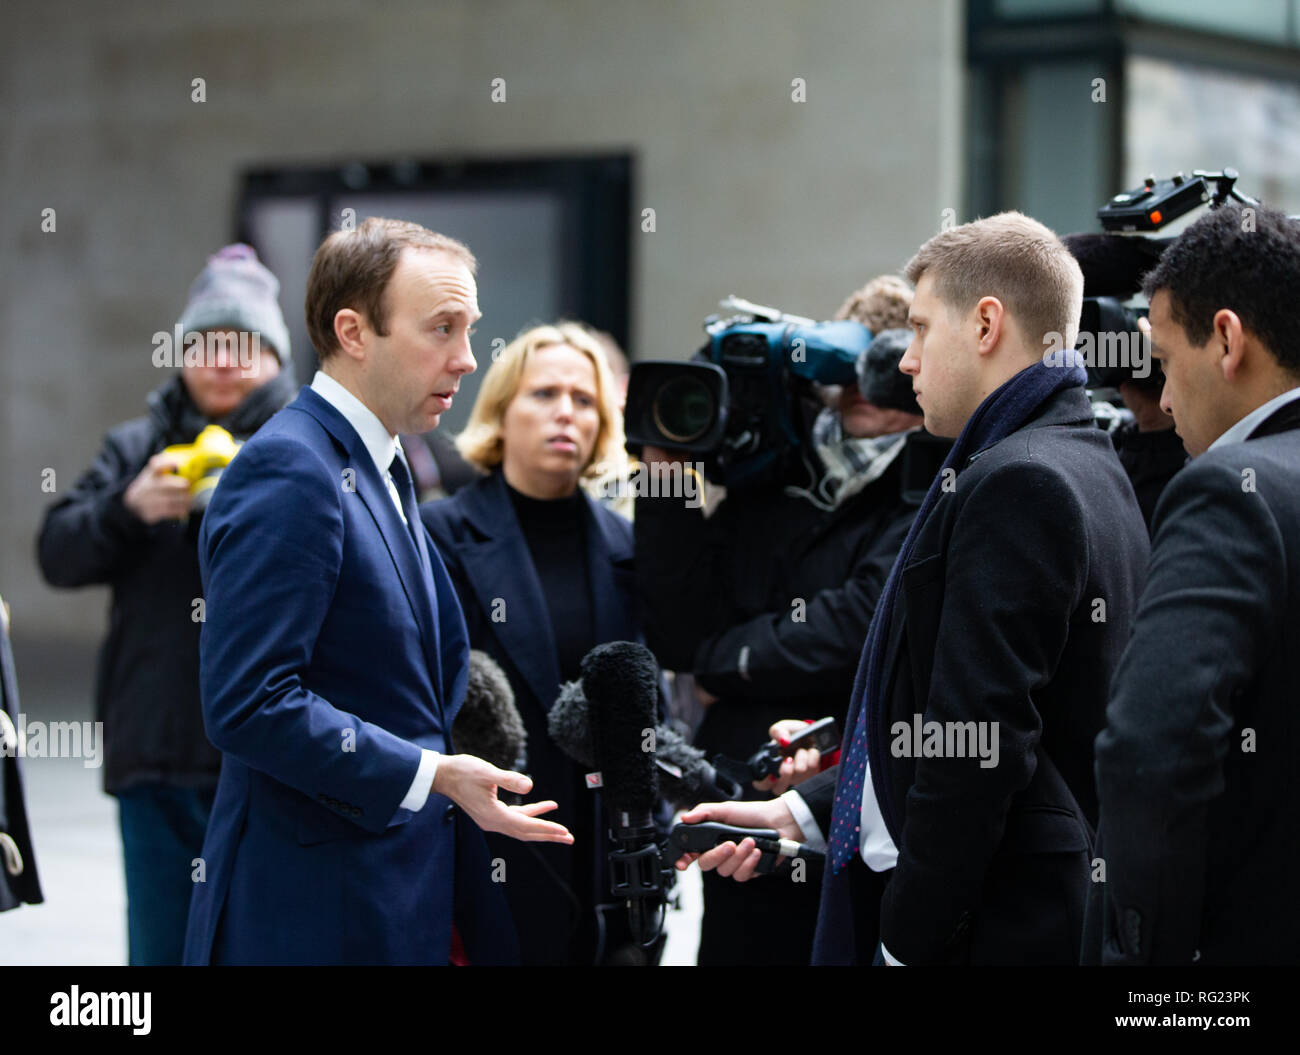 London, UK. 27th January, 2019. Matthew Hancock, Secretary of State for Health and Social care, speaks to the waiting media after appearing on the Andrew Marr Television Show at the BBC Studios. He said that the Government have not ruled out banning social media fims if they fail to remove content that promotes self-harm and suicide. Credit: Tommy London/Alamy Live News Stock Photo